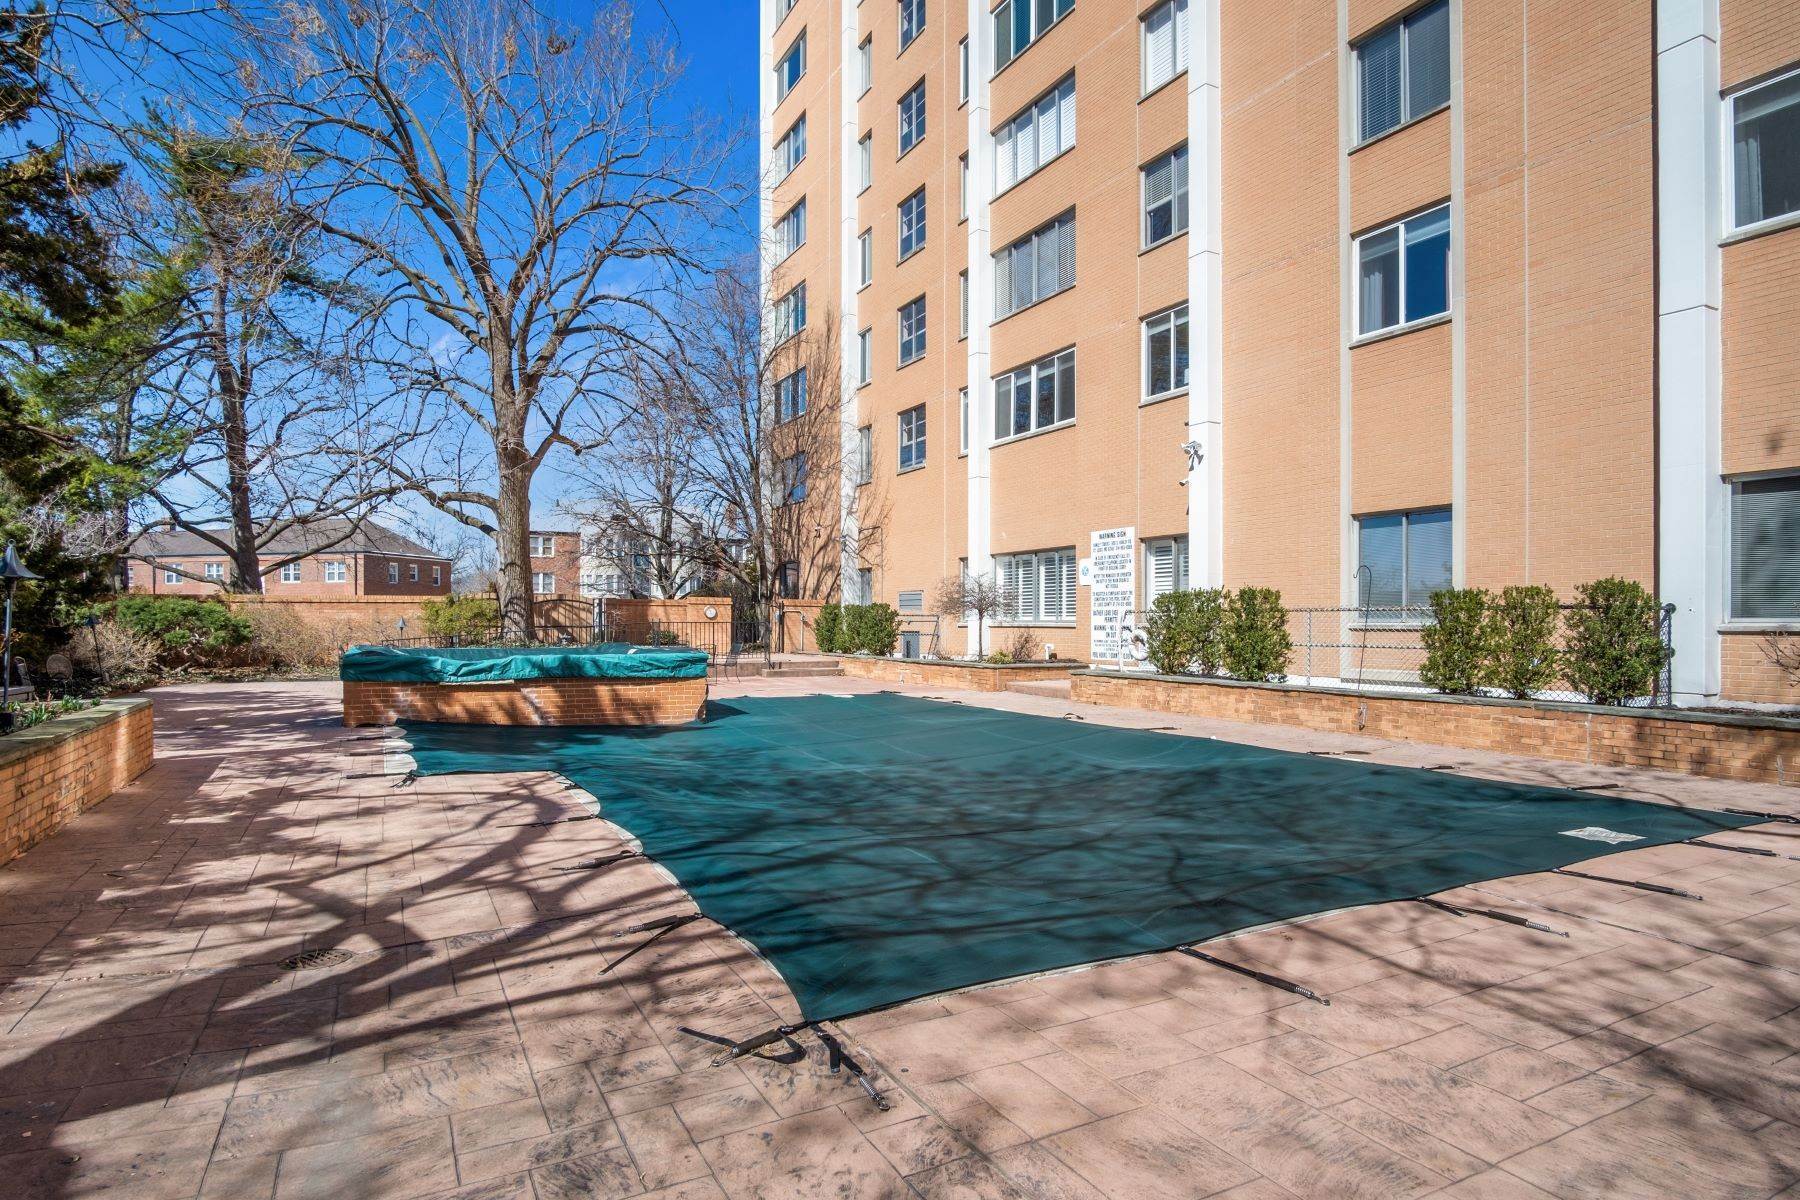 25. Condominiums for Sale at Nicely Kept Condo in the Heart of Clayton 900 South Hanley Road, Unit #14B Clayton, Missouri 63105 United States